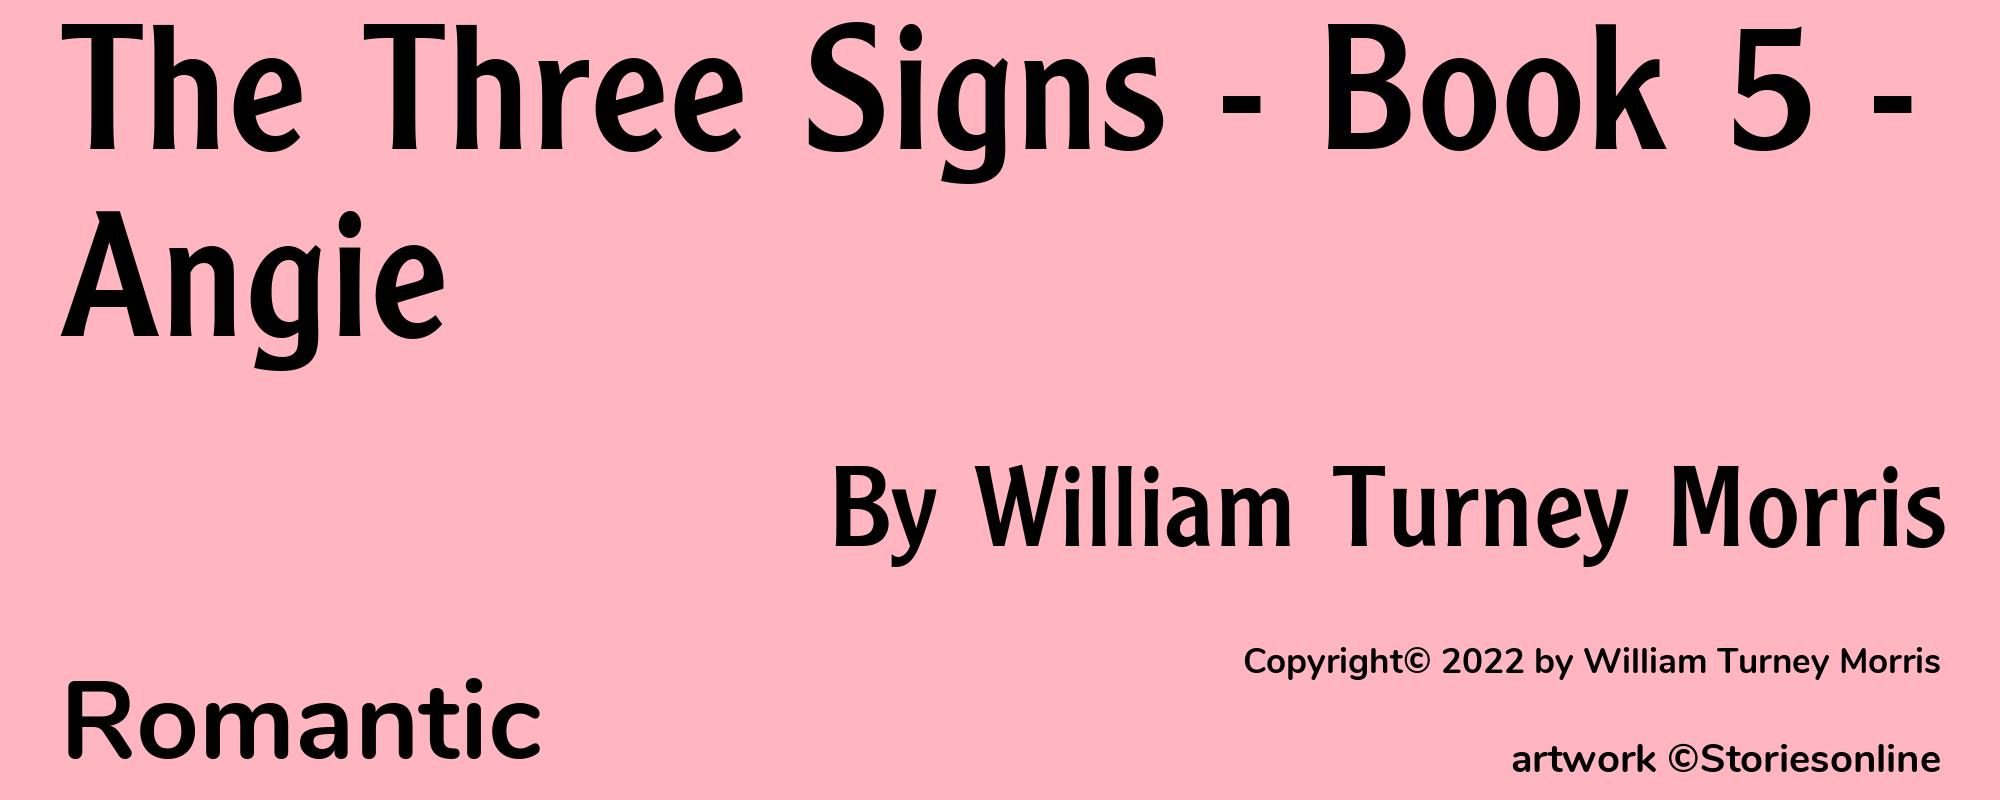 The Three Signs - Book 5 - Angie - Cover